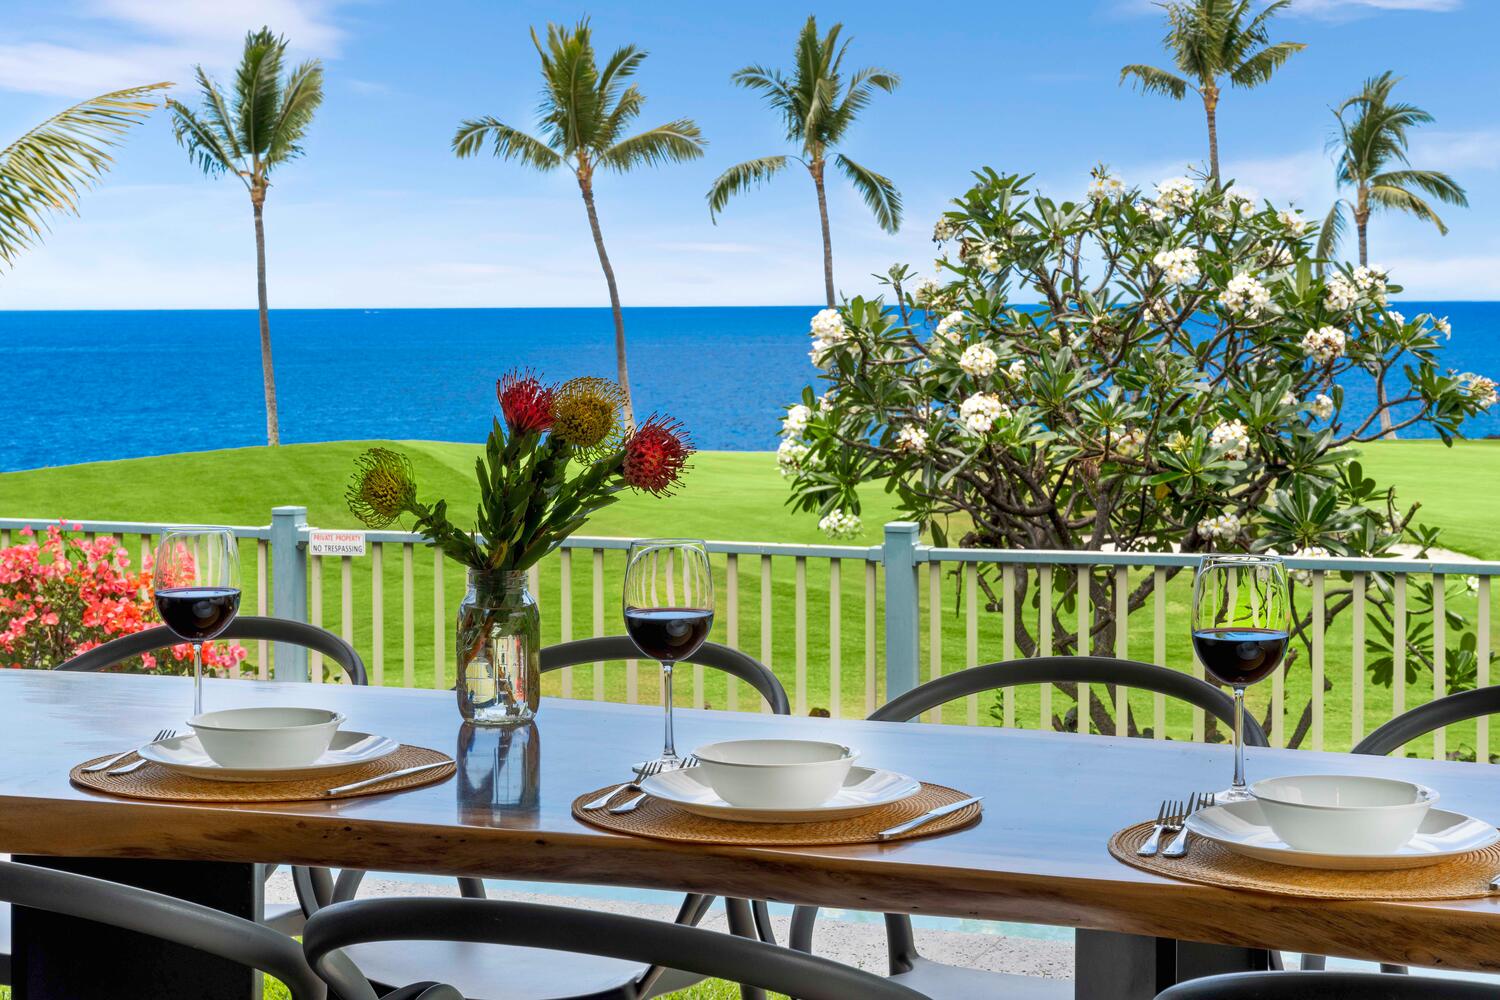 Kailua-Kona Vacation Rentals, Holua Kai #26 - Dine with a view: Enjoy meals at this outdoor table set against a stunning backdrop of the ocean and tropical flora.